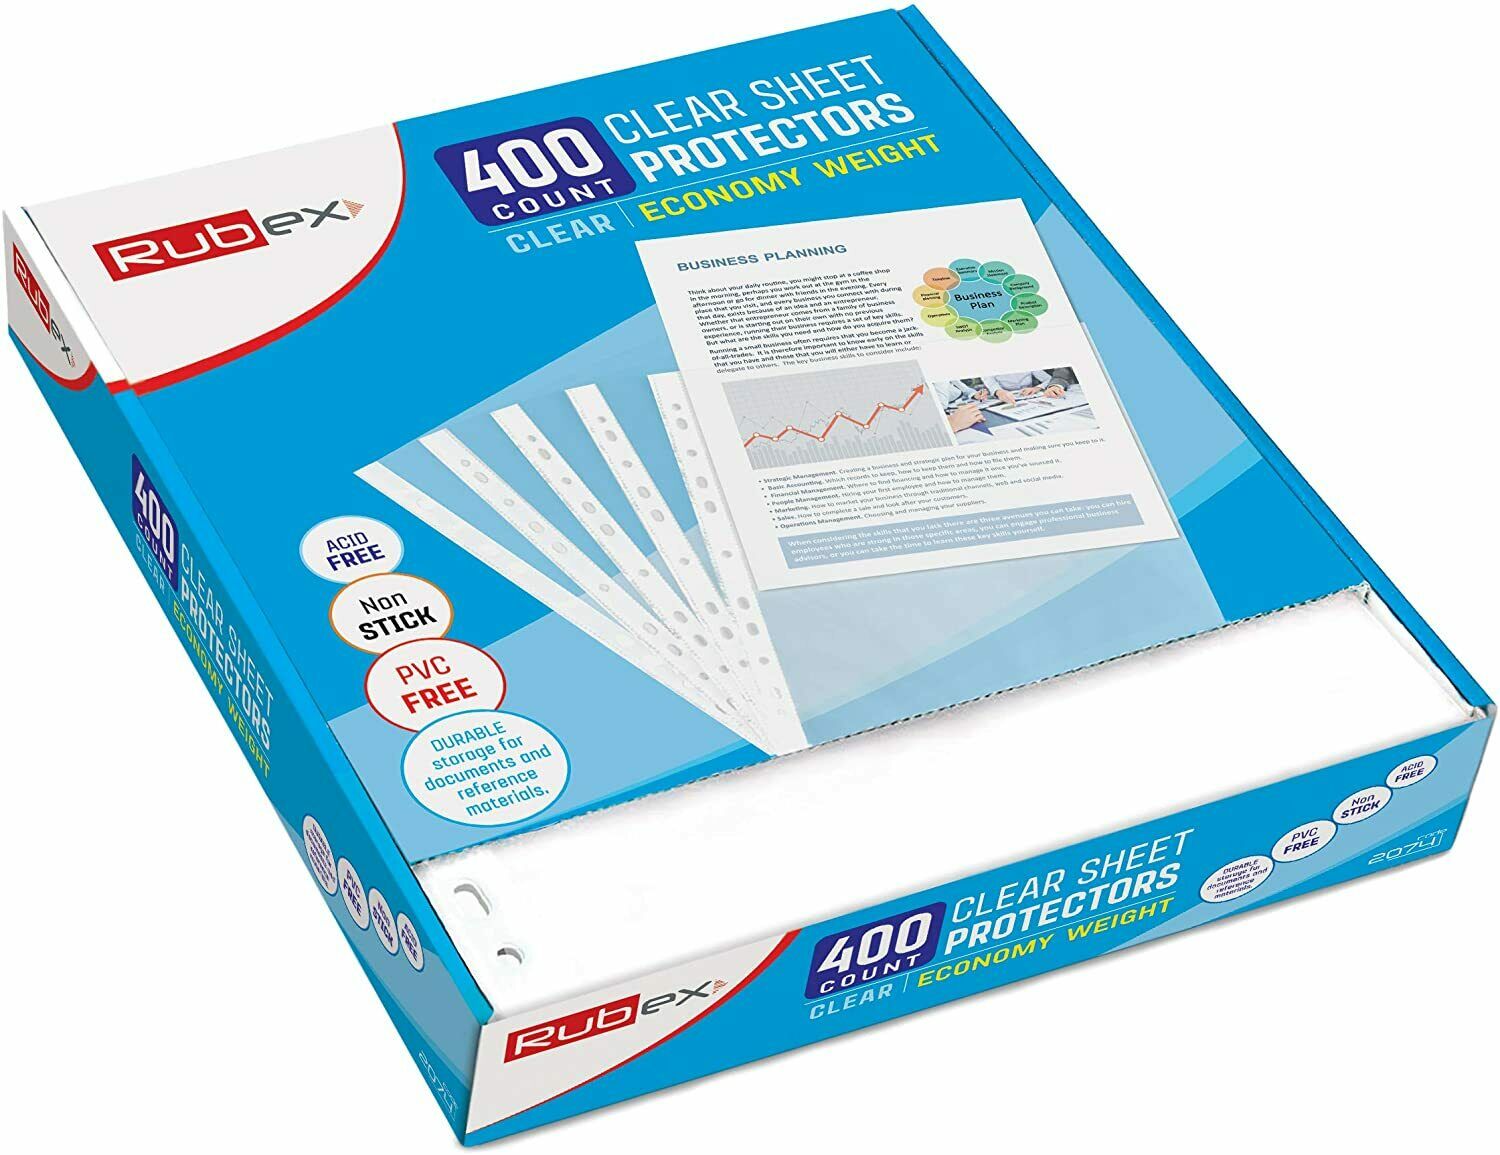 400 Sheet Protectors 8.5 x 11 Inches - Clear Plastic Sheet